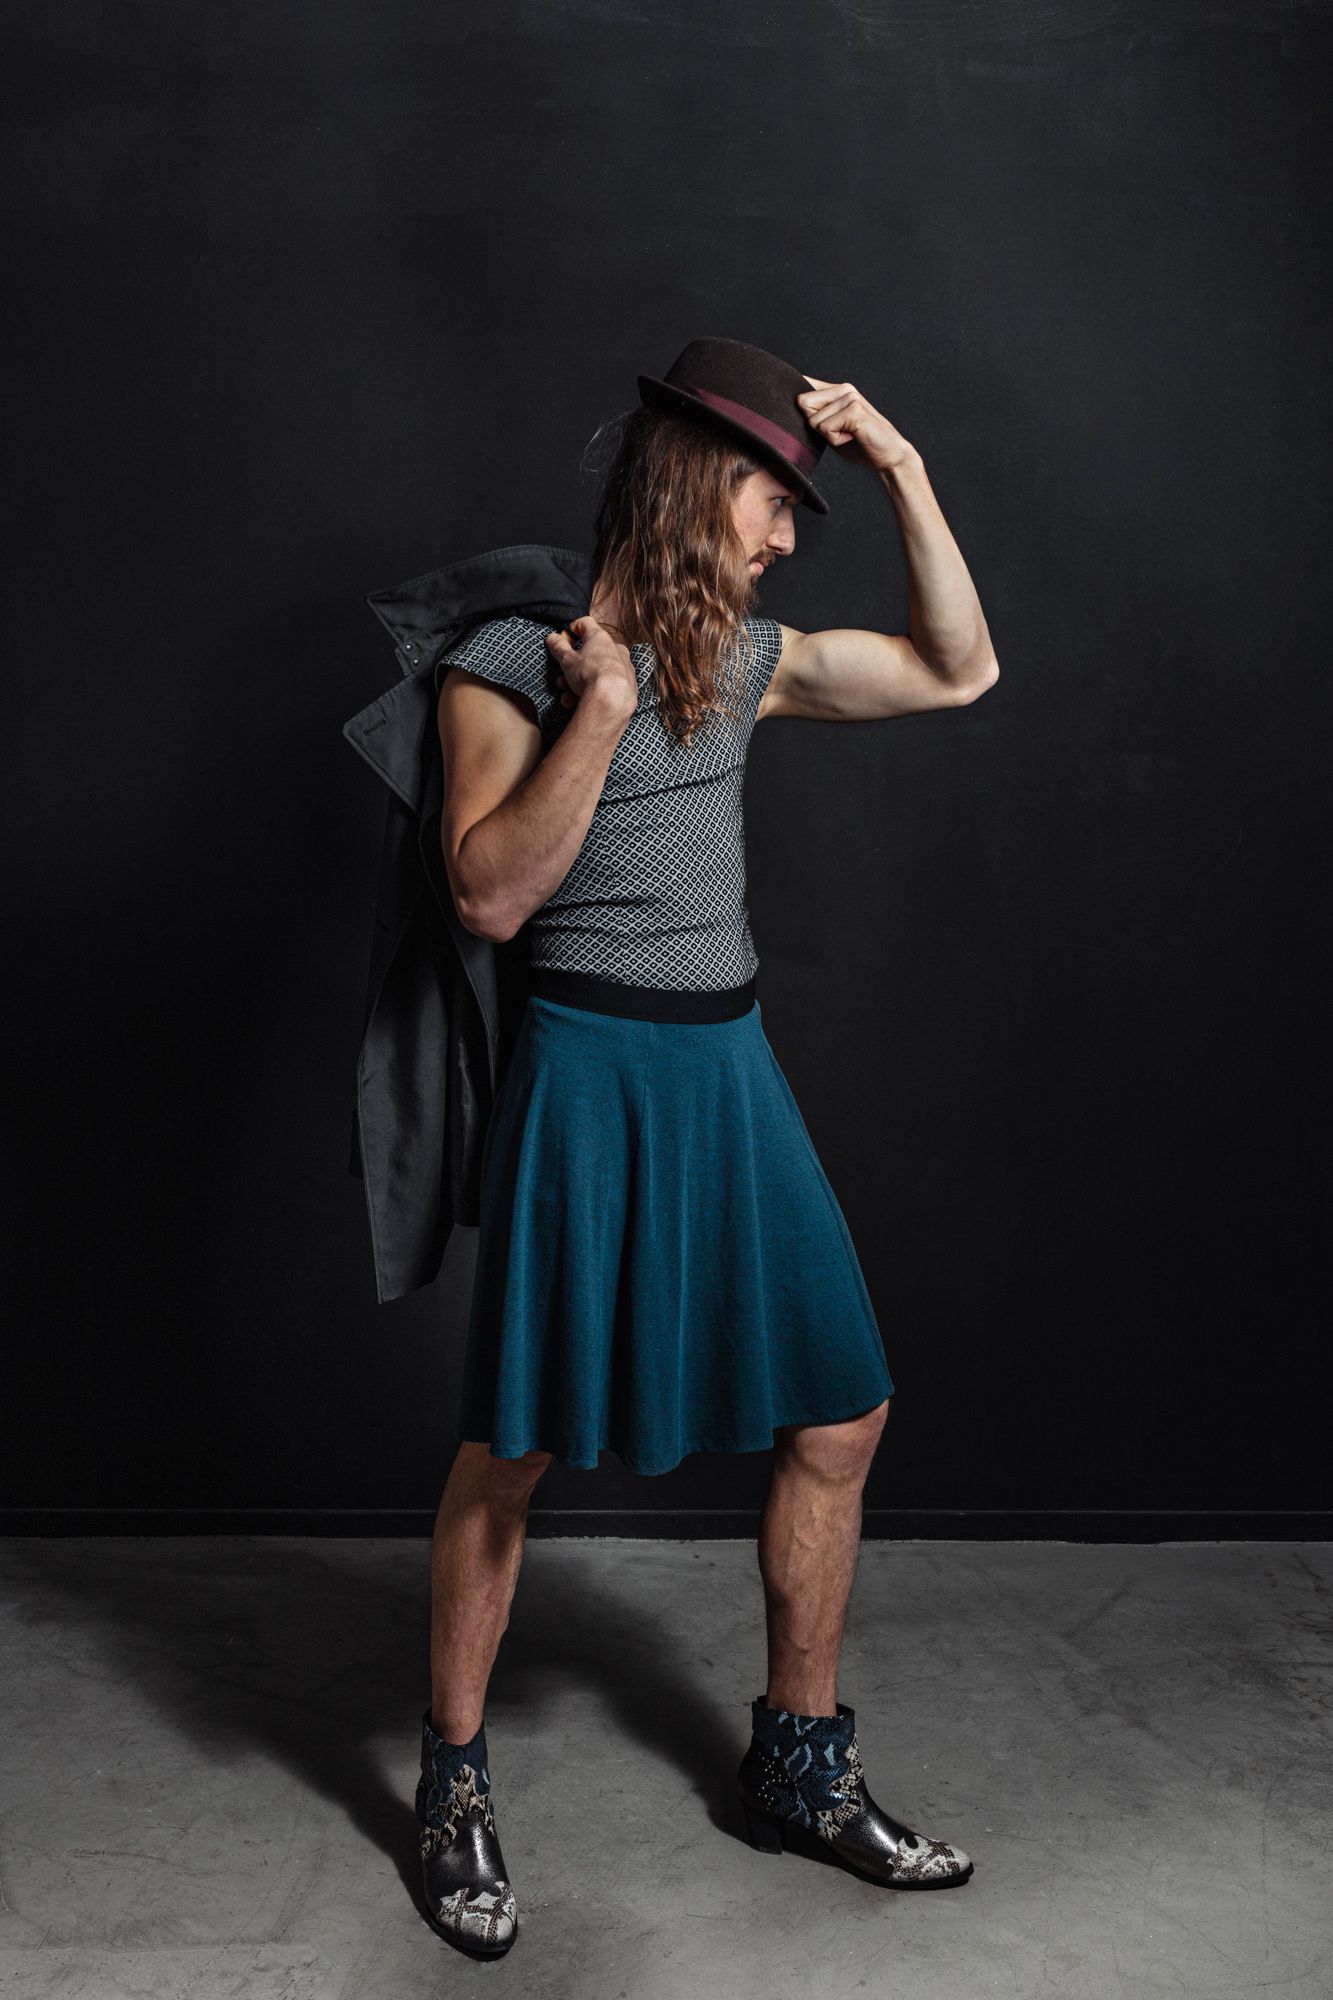 Skirting The Issue - Helping Men Feel Comfortable Wearing Women's Clothing